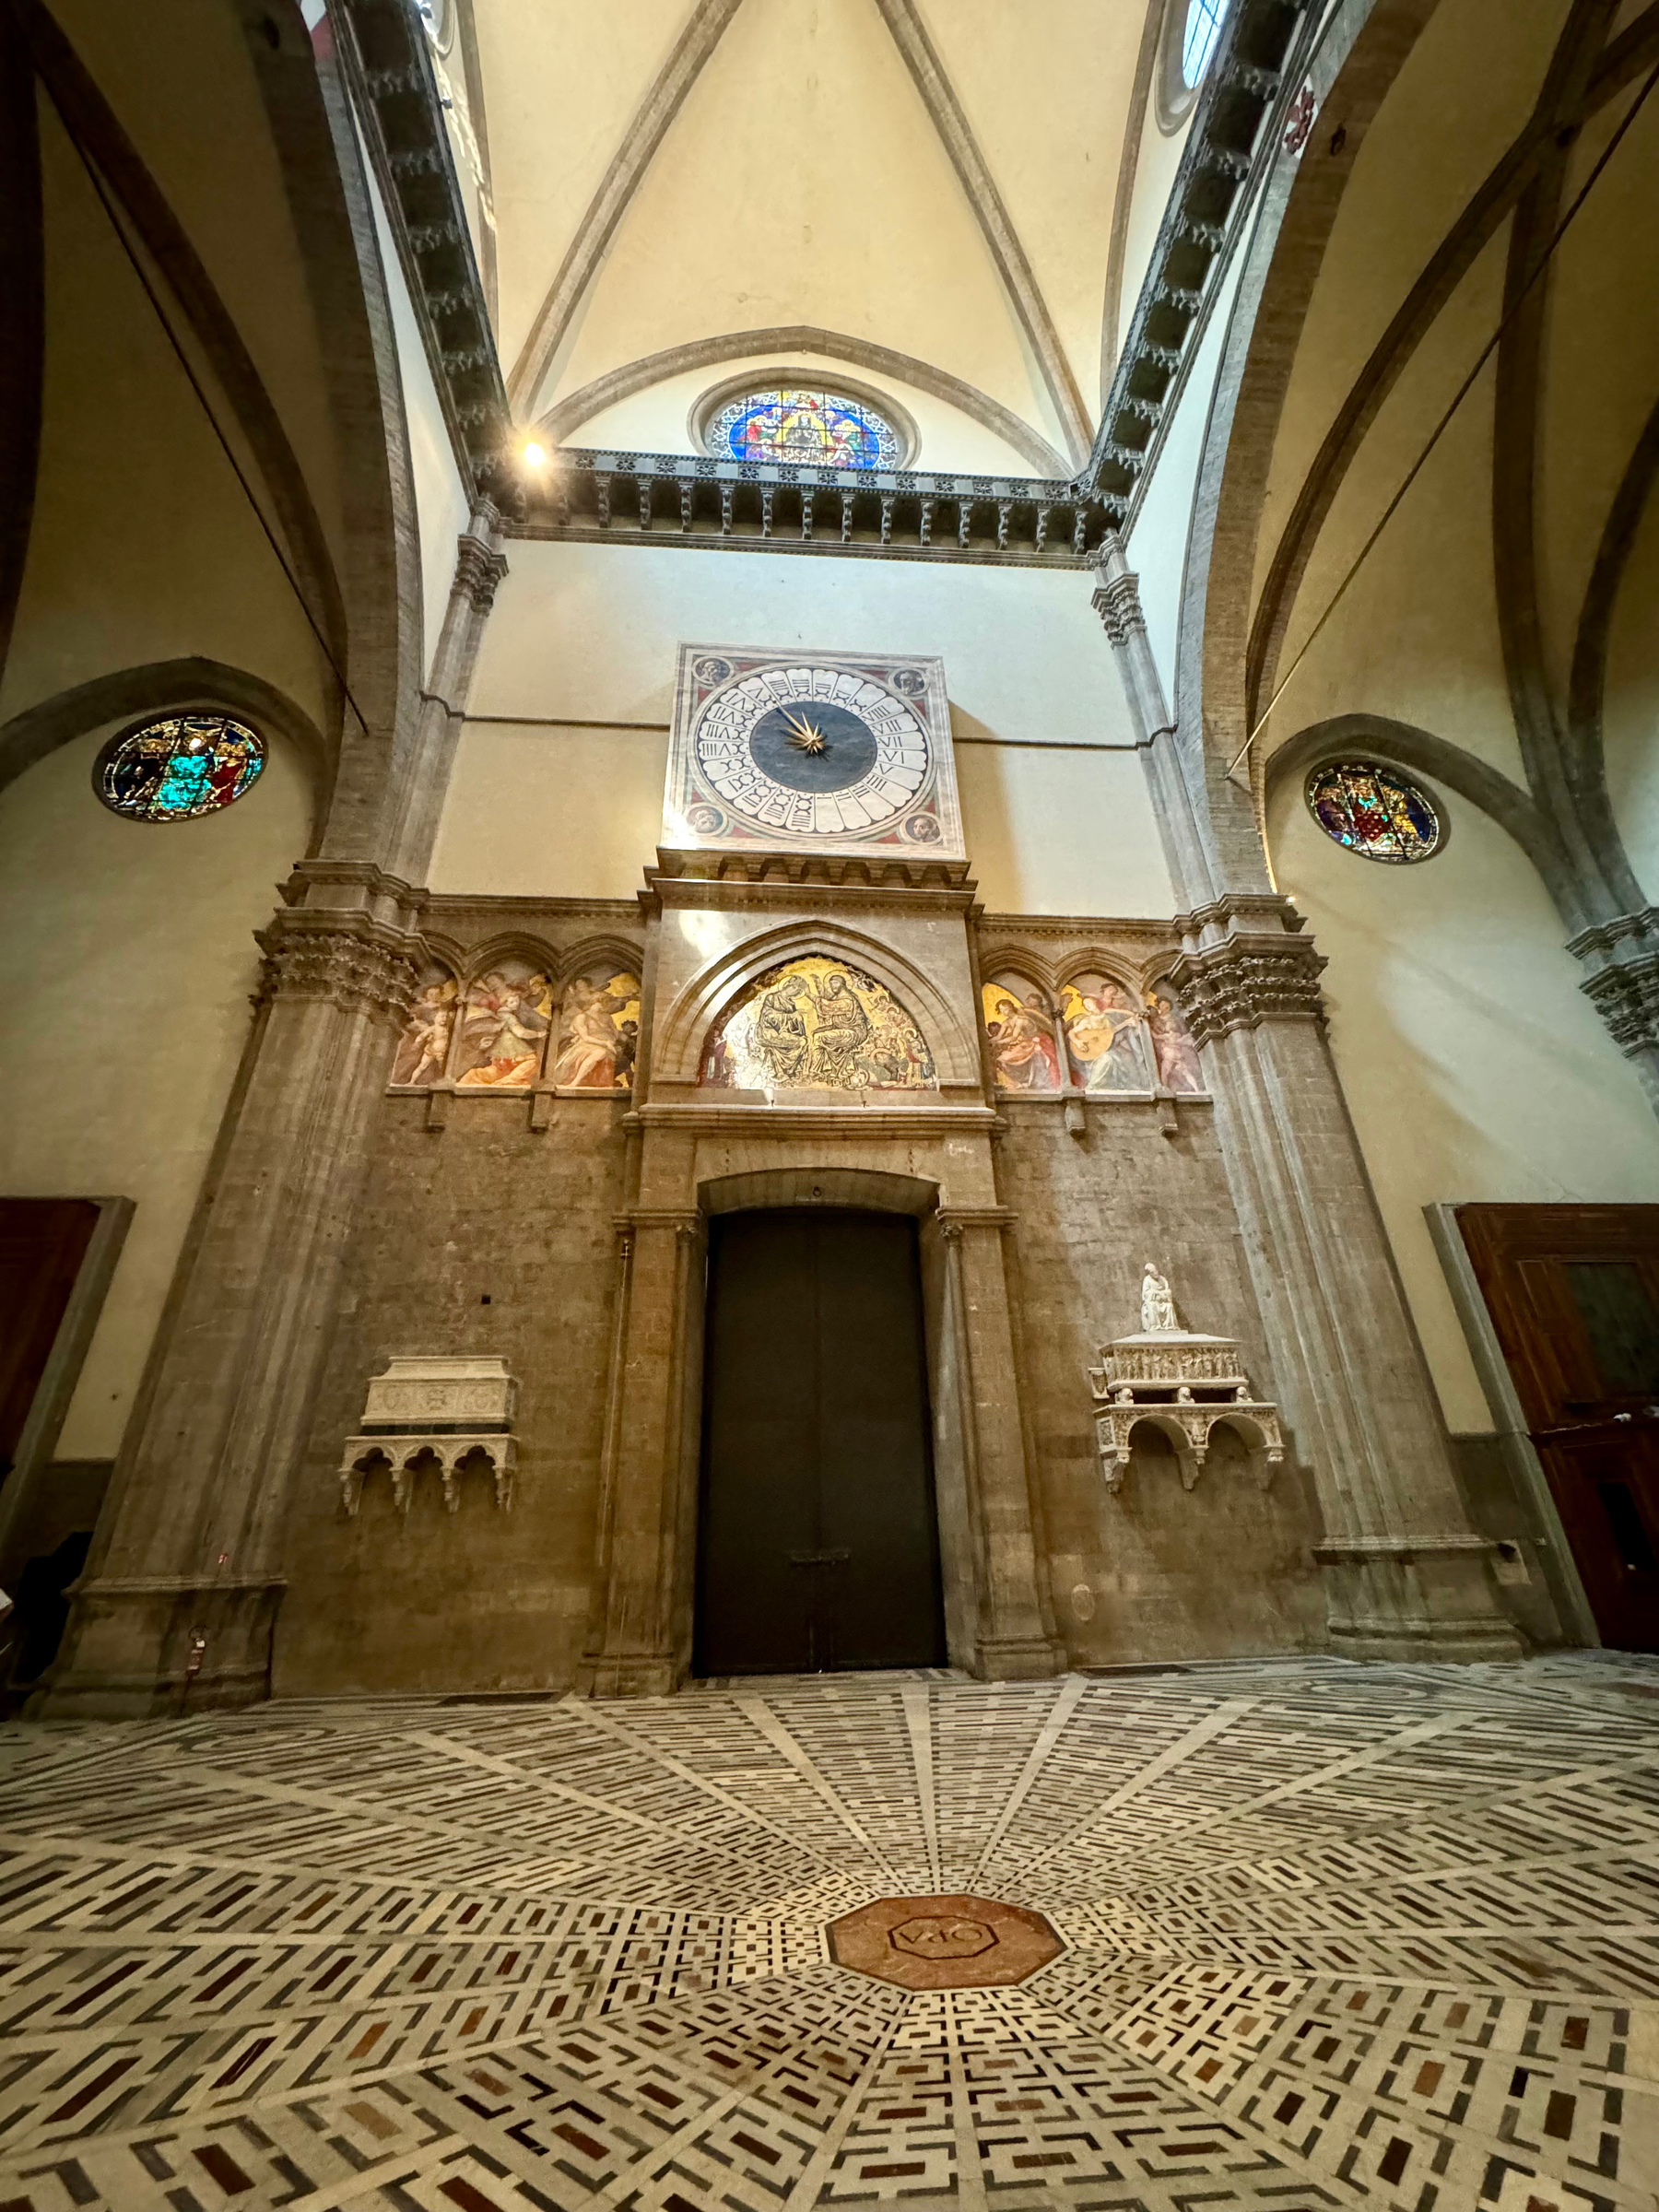 The image shows the interior of a historic cathedral, featuring a large ornate clock on the wall above a dark wooden door, flanked by intricate stone carvings and religious frescoes. The ceiling is vaulted with stained glass windows above. The patterned marble floor. 